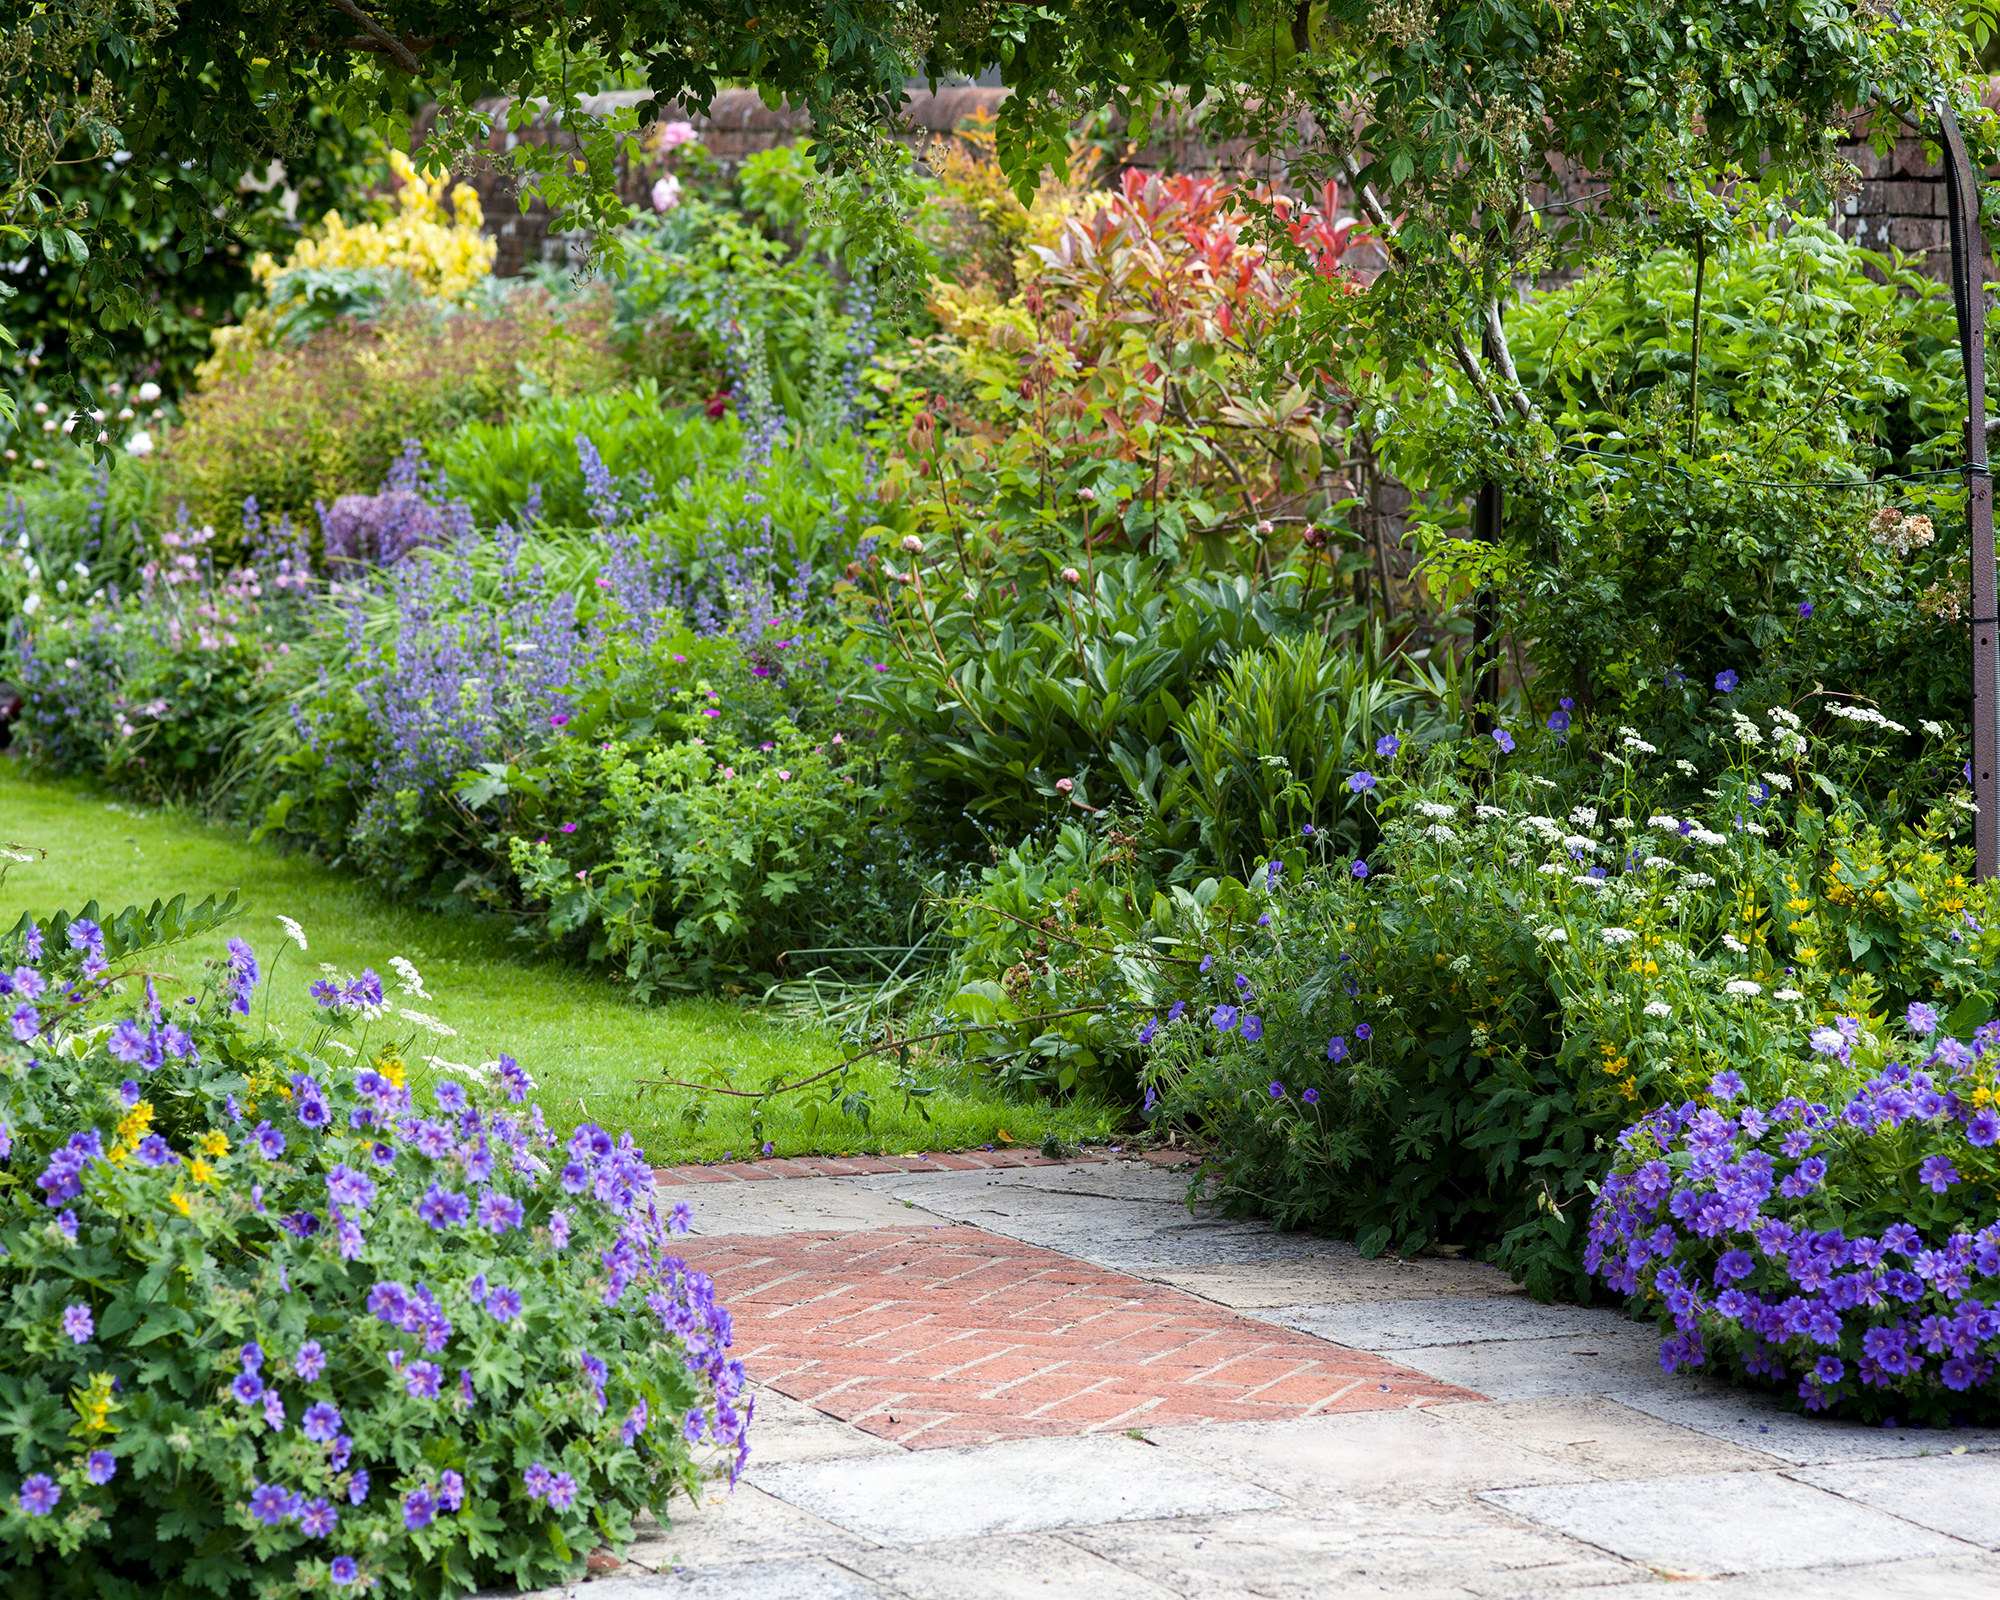 Beds of perennials either side of a stone and brick patio leading onto a lawn.